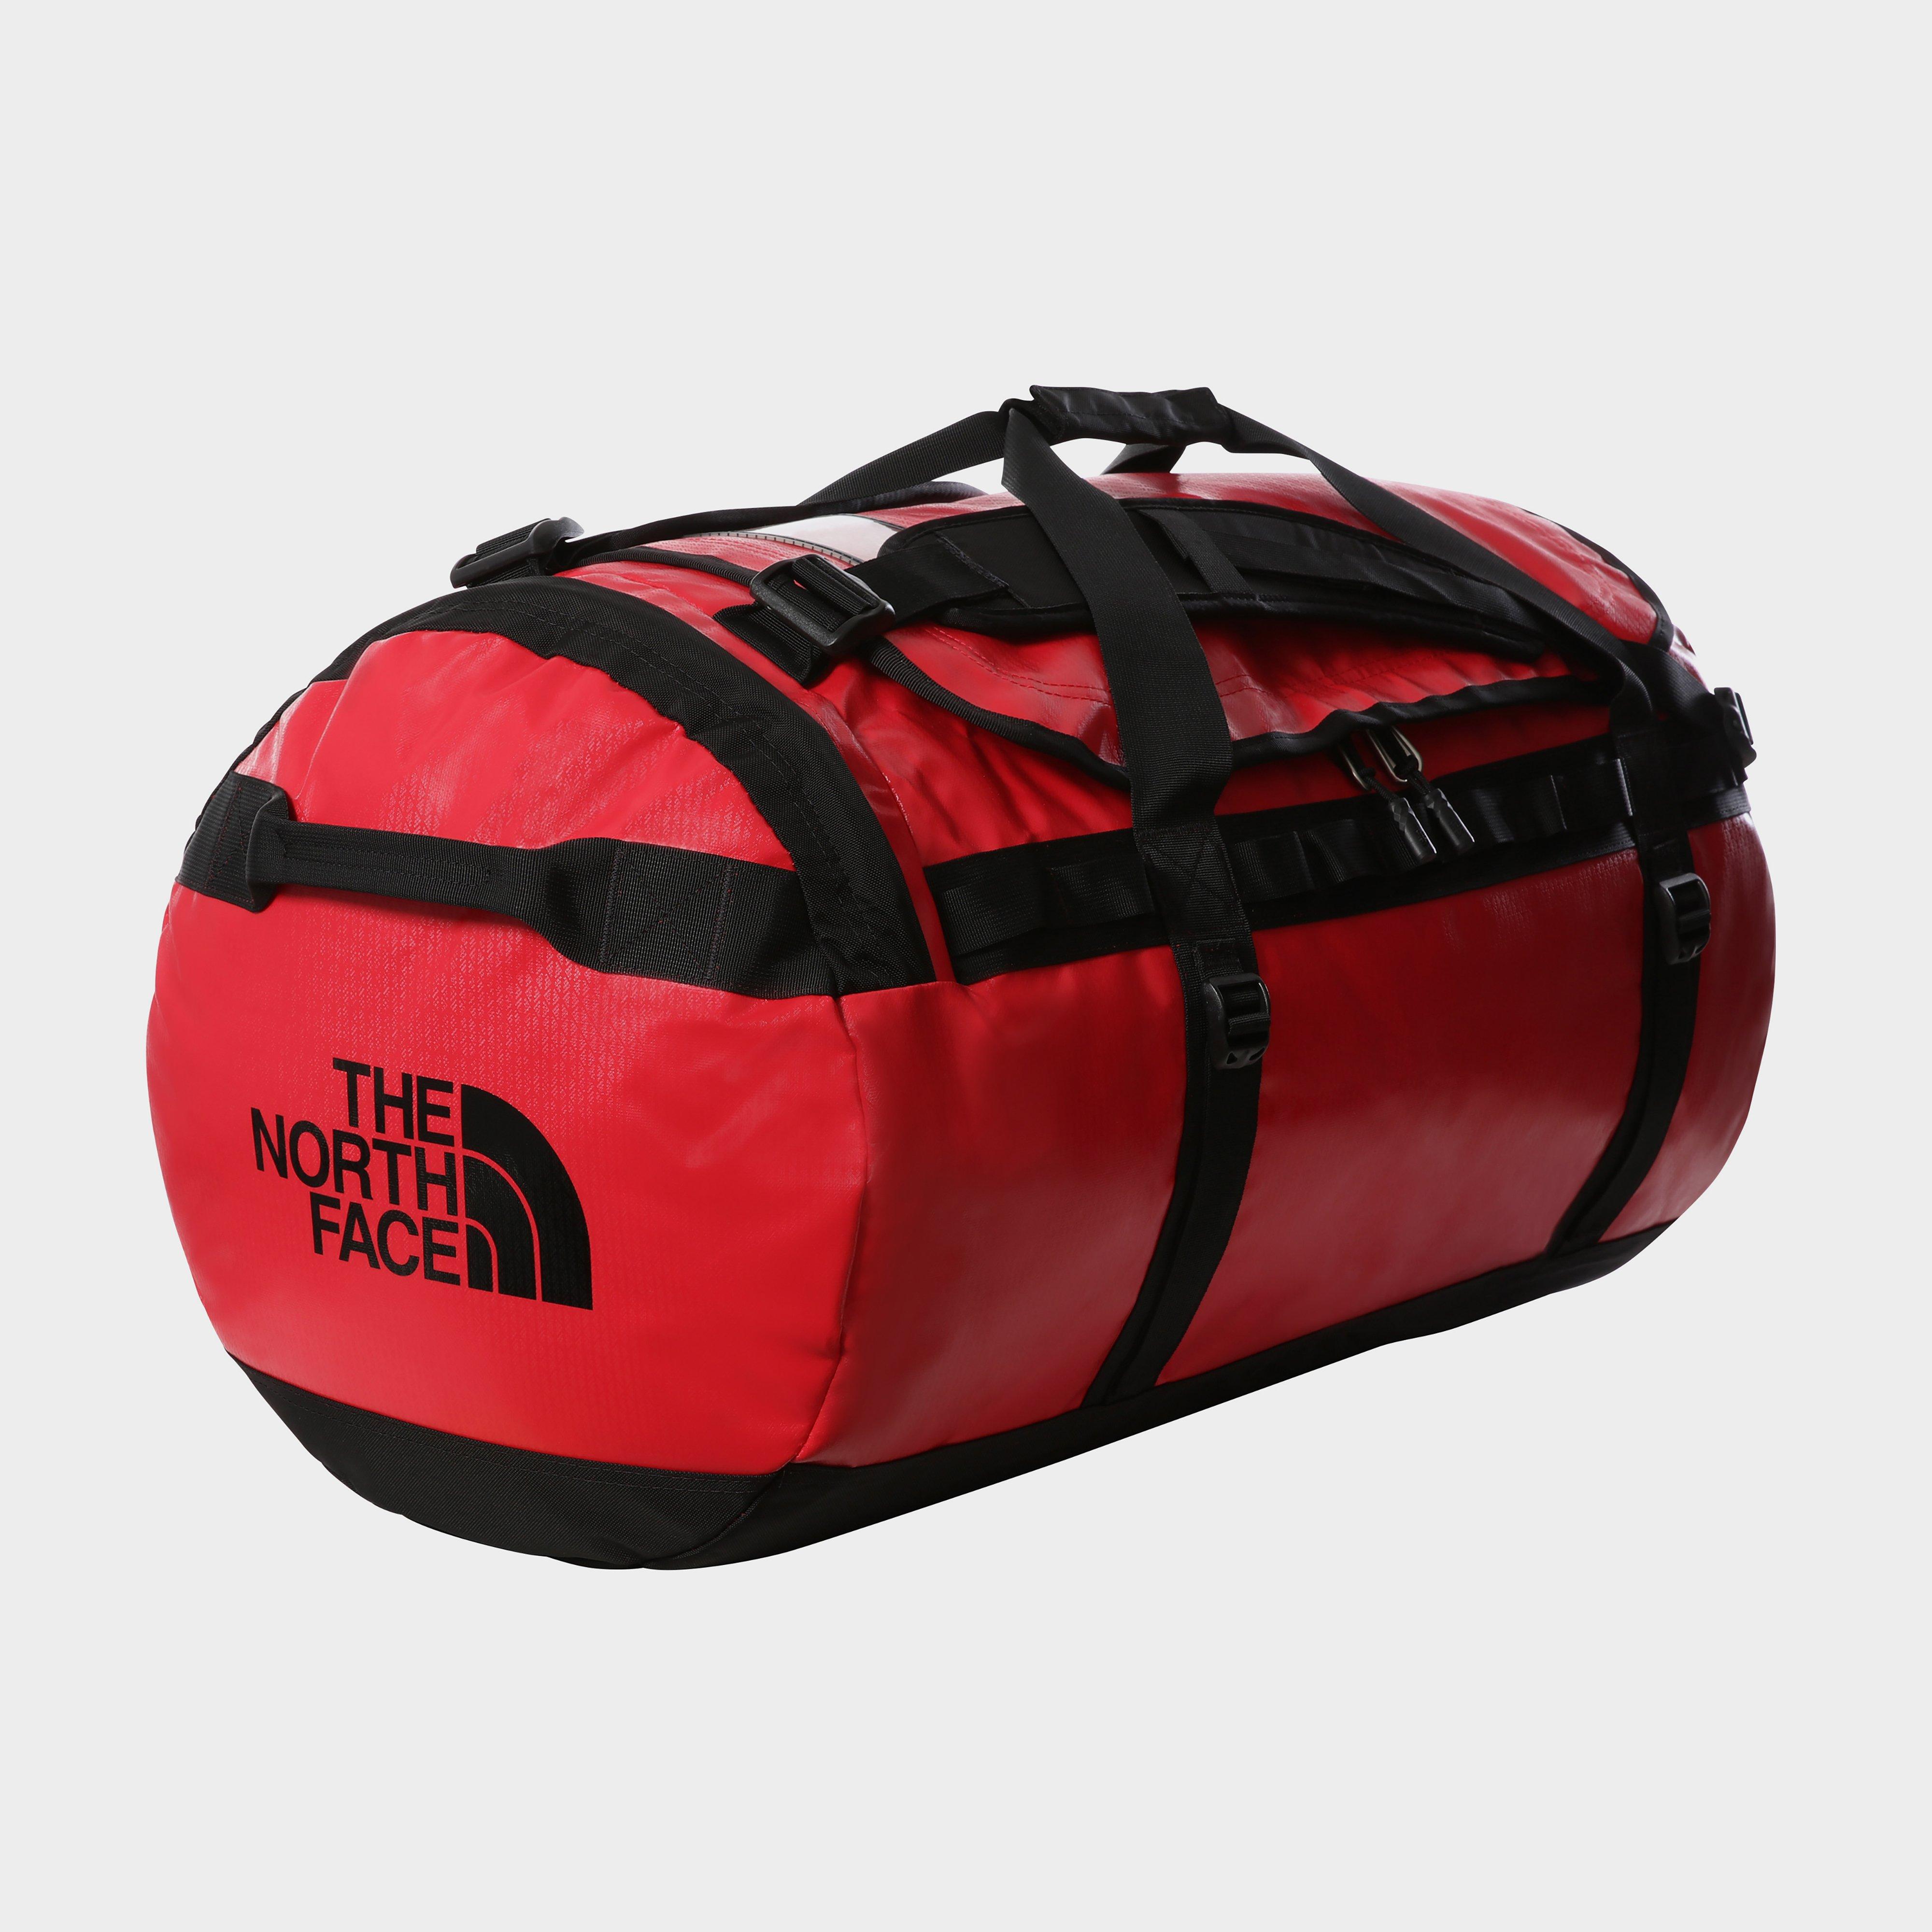  The North Face Base Camp Duffel Bag (Large), Red